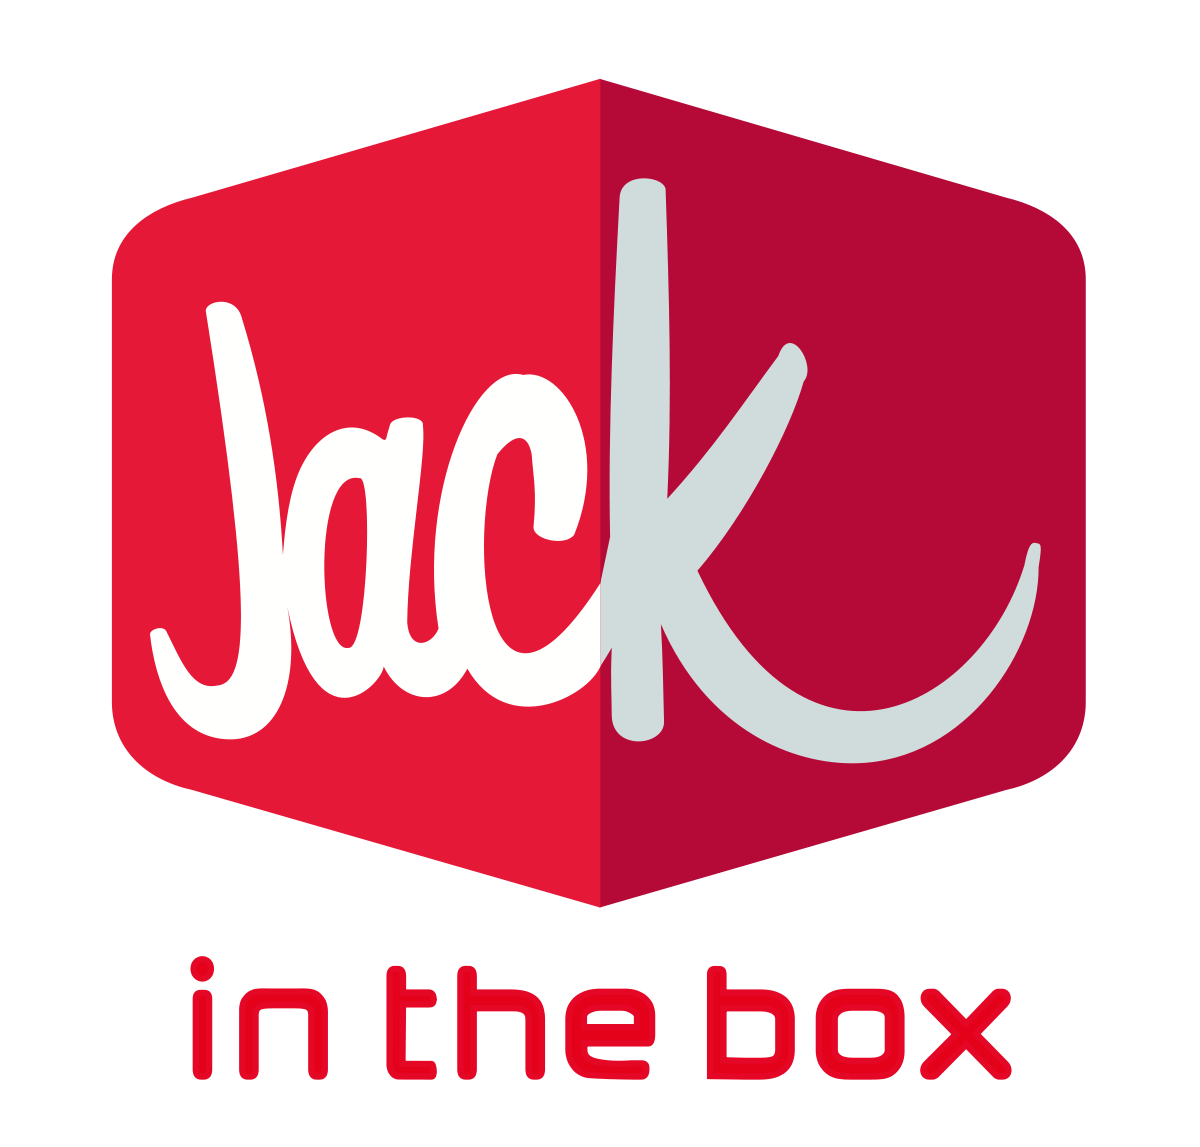 Famous White Box Logo - Jack in the Box